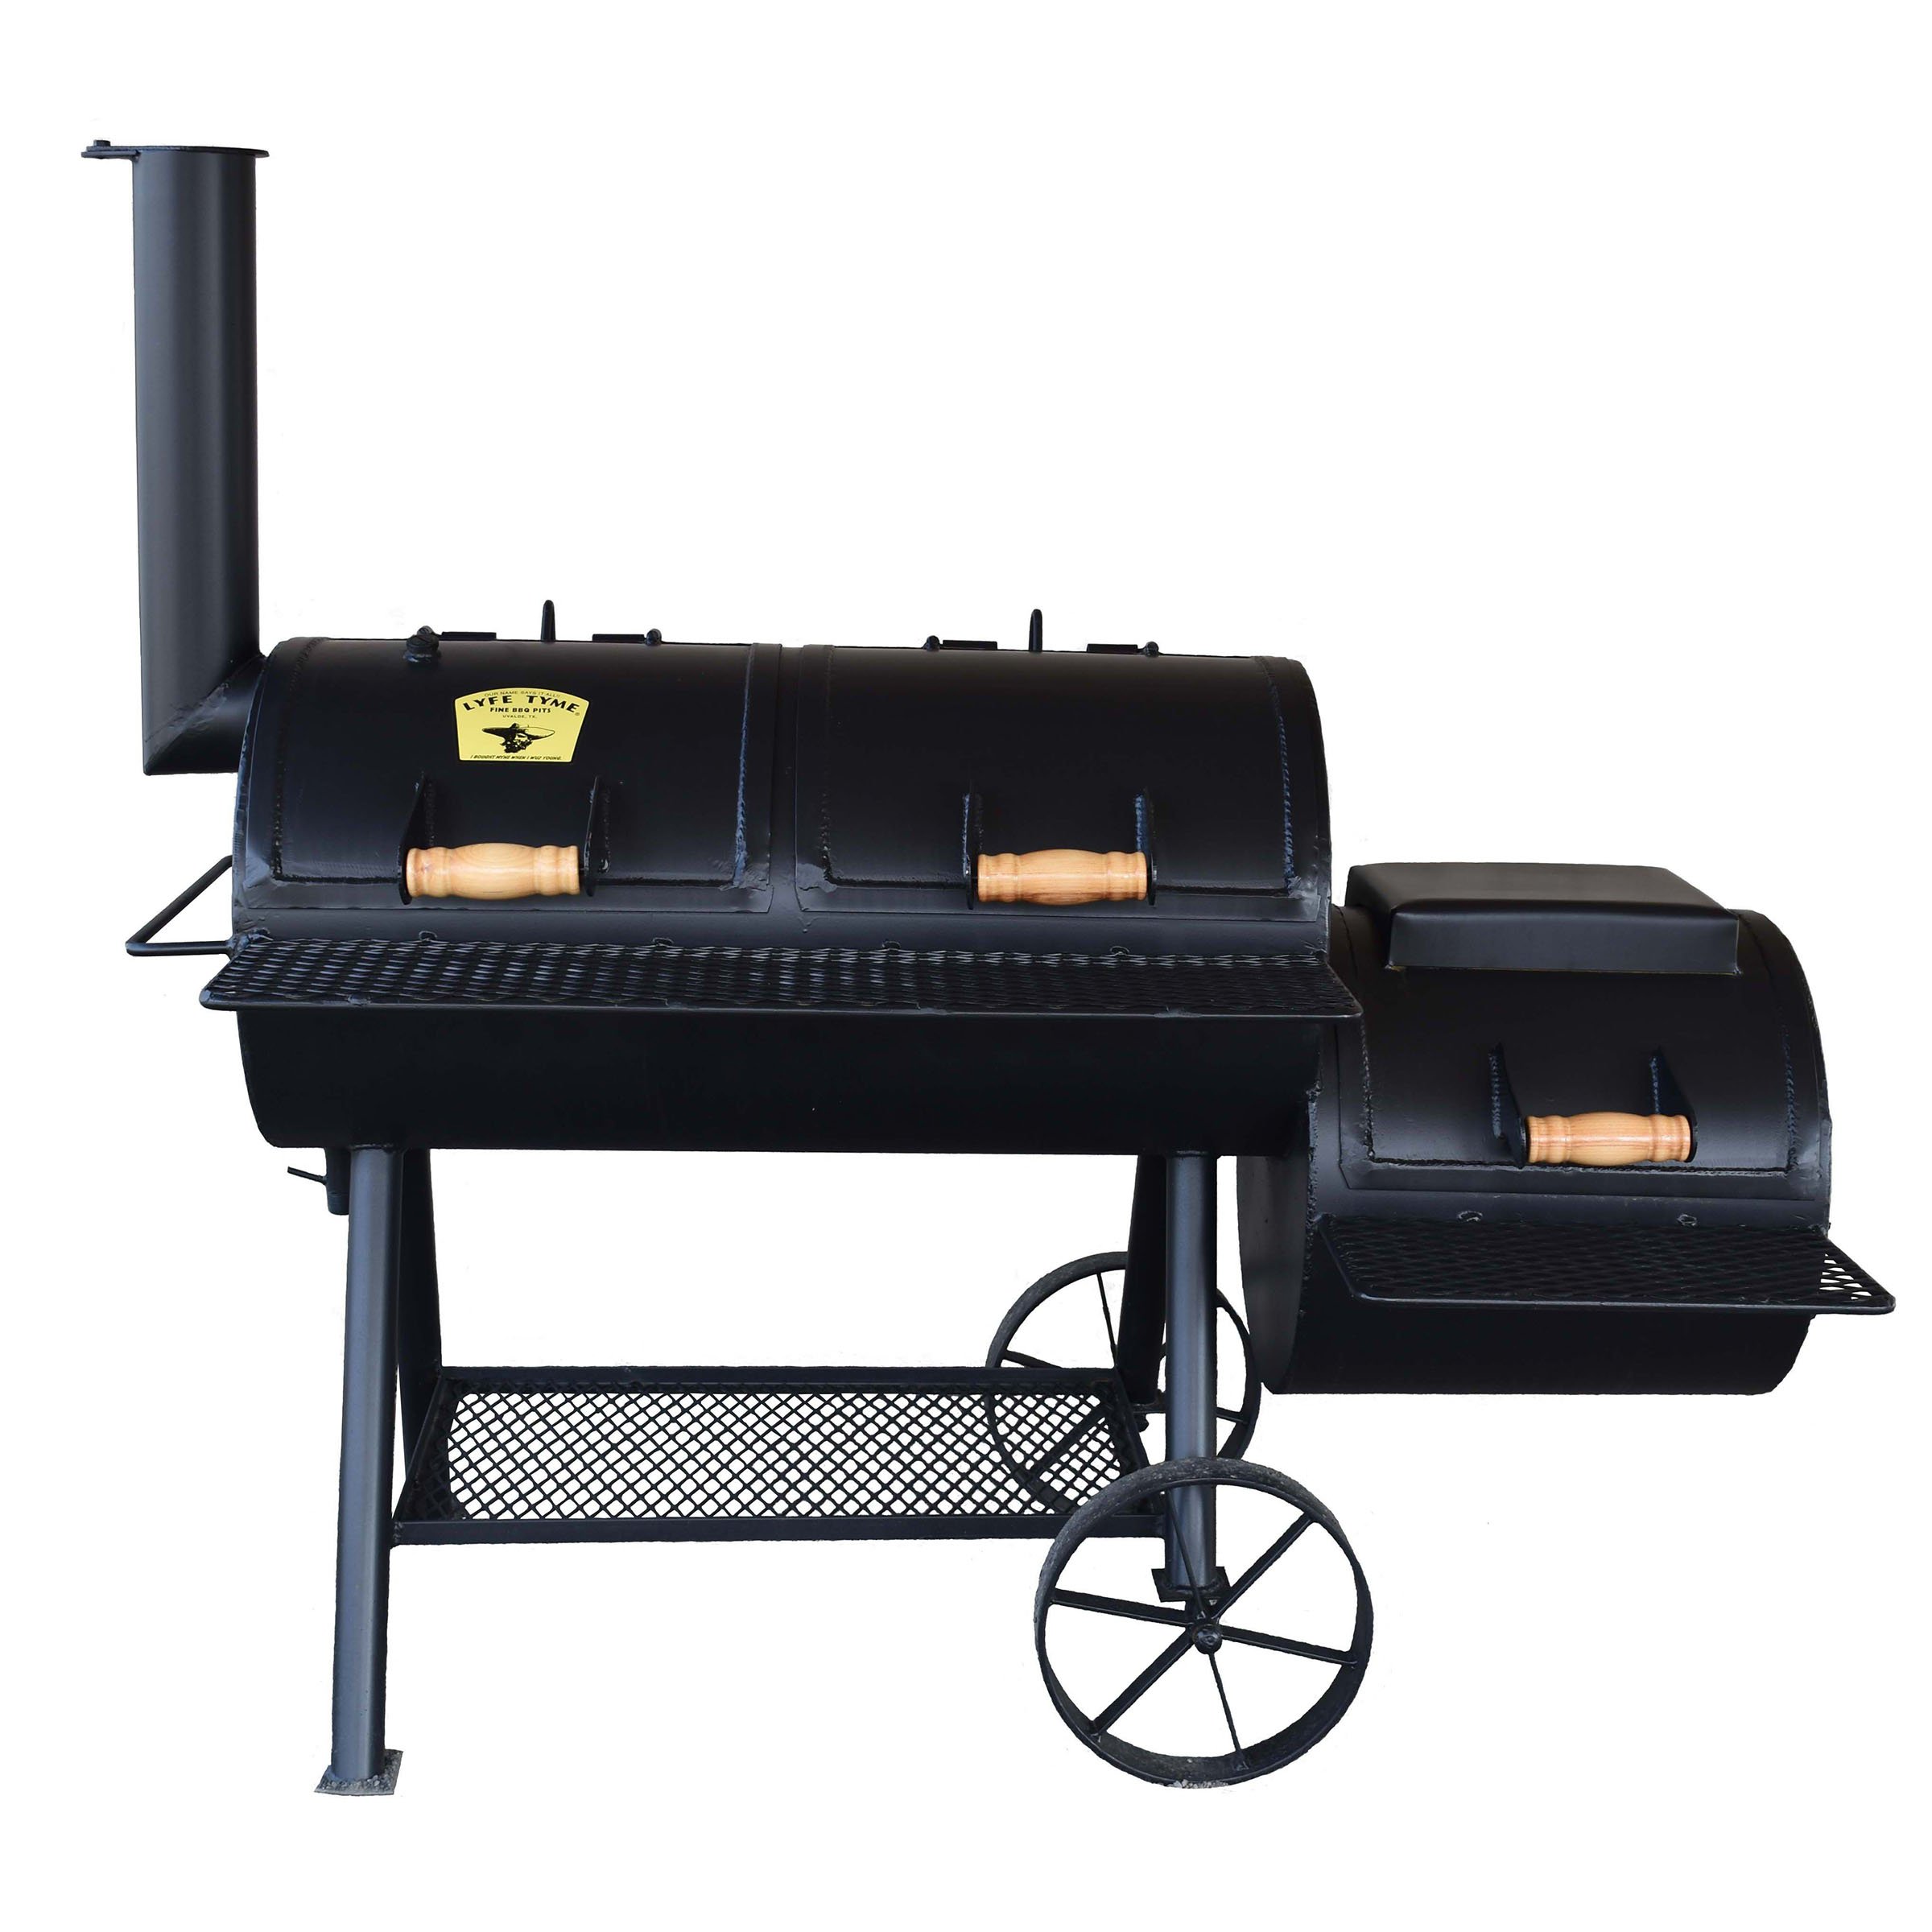 national Overvind Uforudsete omstændigheder Lyfe Tyme Double Lid Grill with Firebox - Shop Grills & Smokers at H-E-B